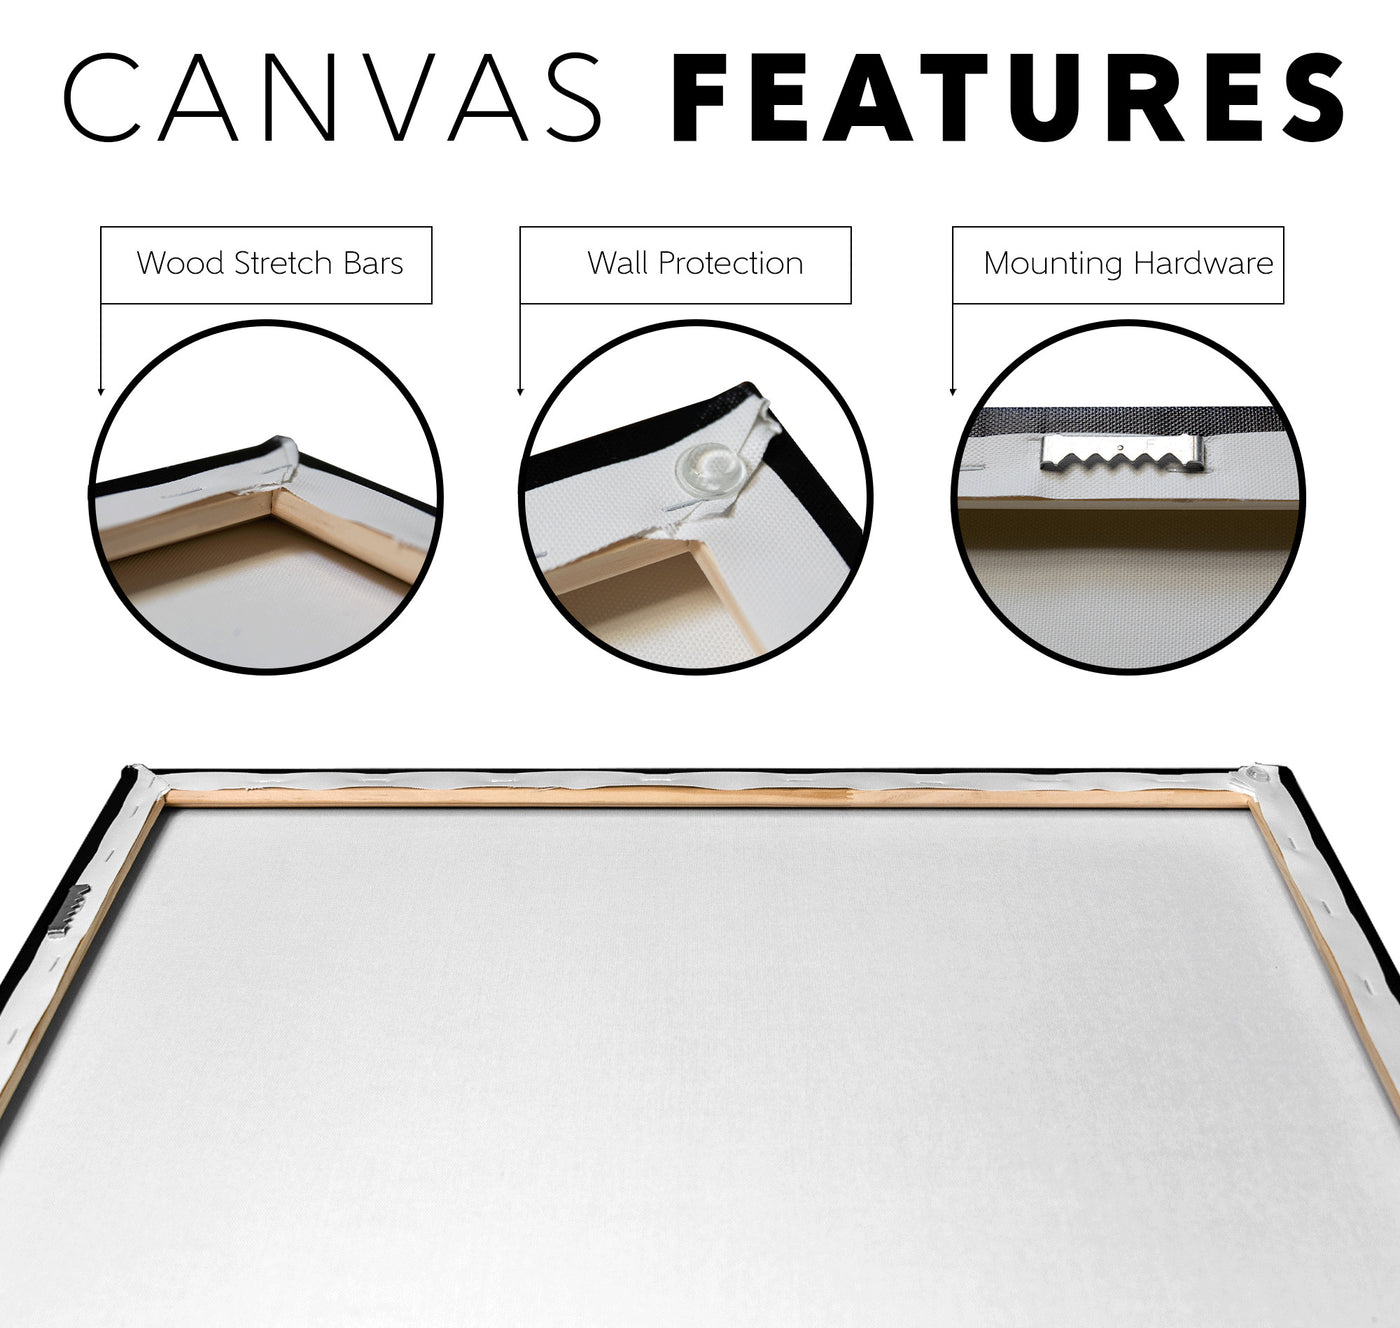 Infographic detailing features of a Canvas Art Print, showing wood stretch bars, wall protection, and mounting hardware, with labels and close-up images.